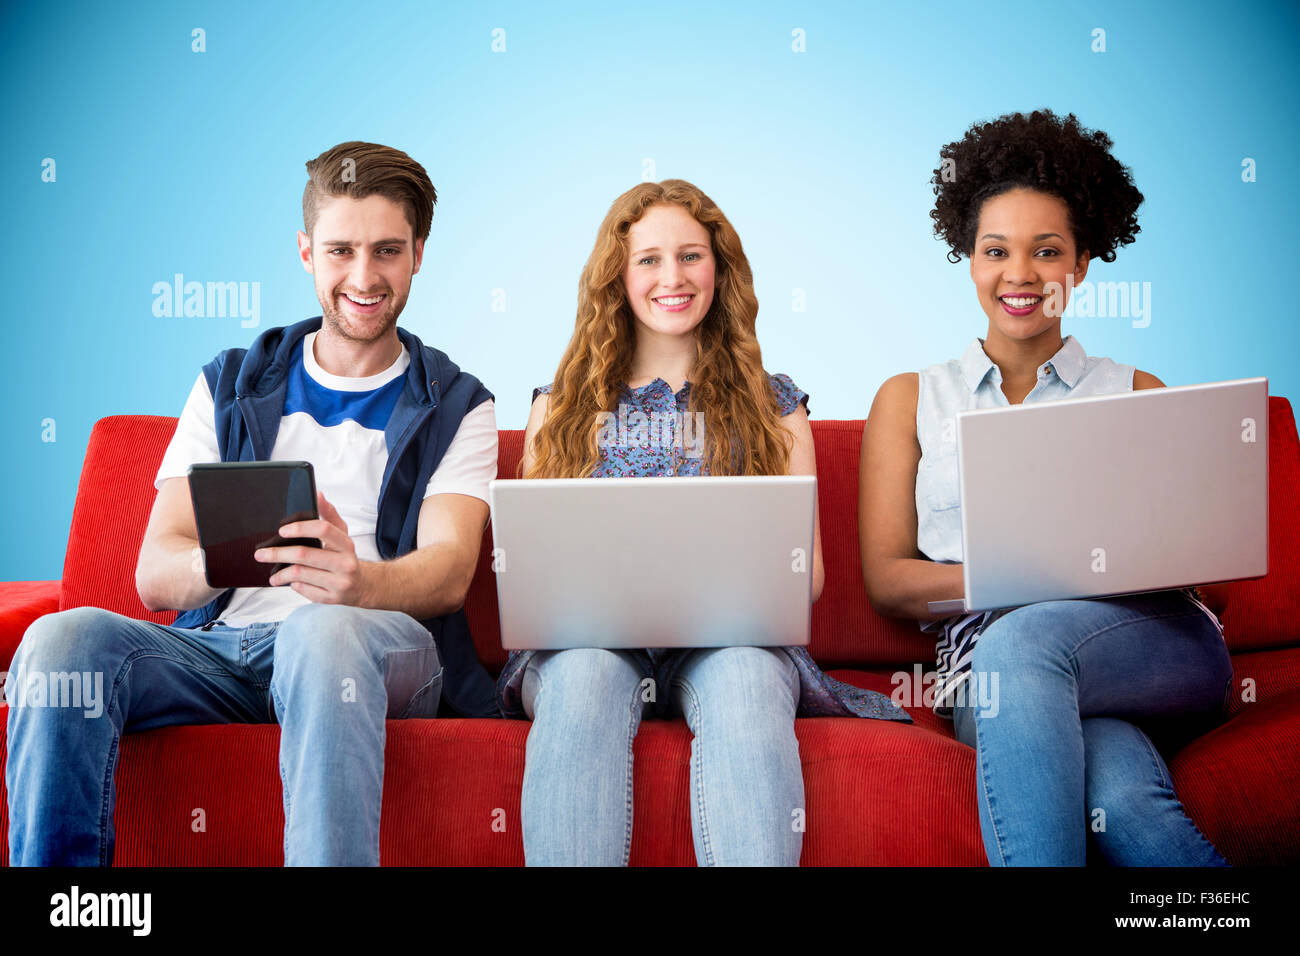 Composite image of young adults using electronic devices on couch Stock Photo